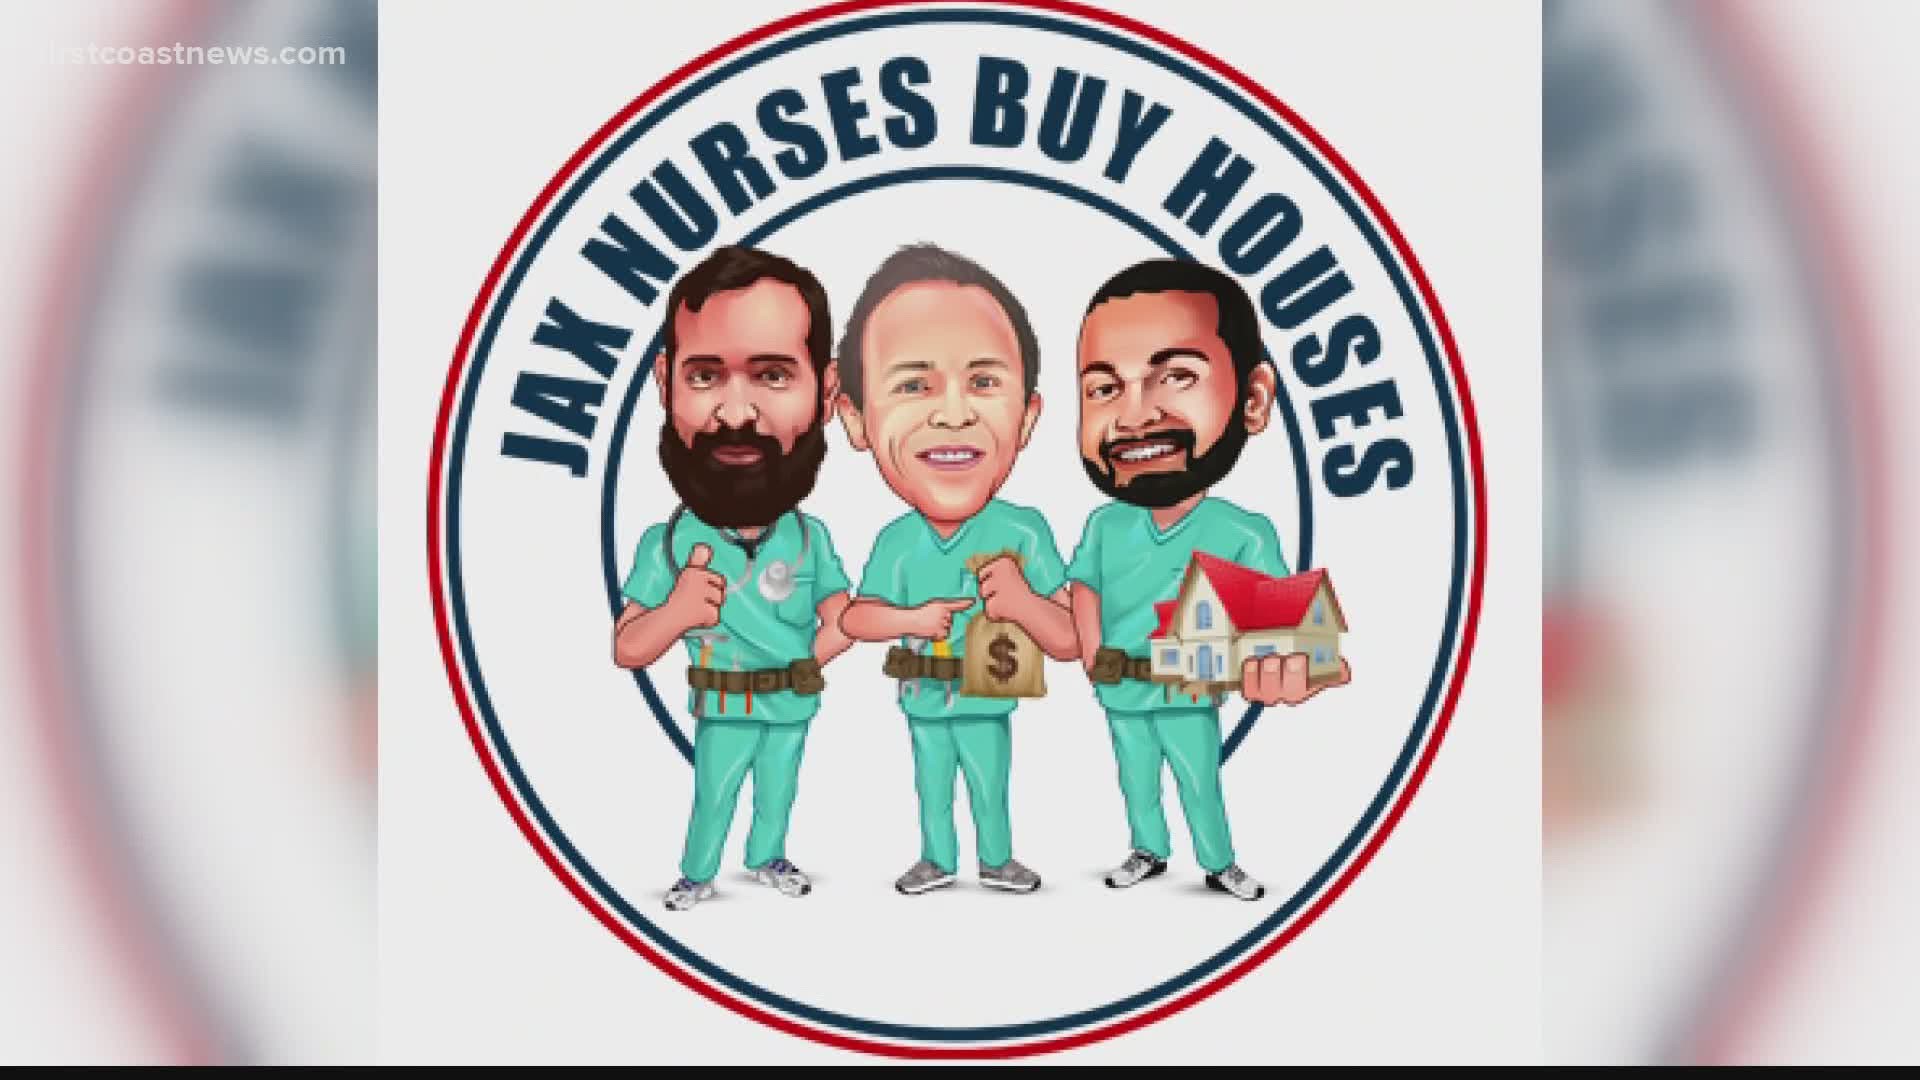 Jax Nurses Buy Houses is a local business working to help get personal protective equipment to hospitals.